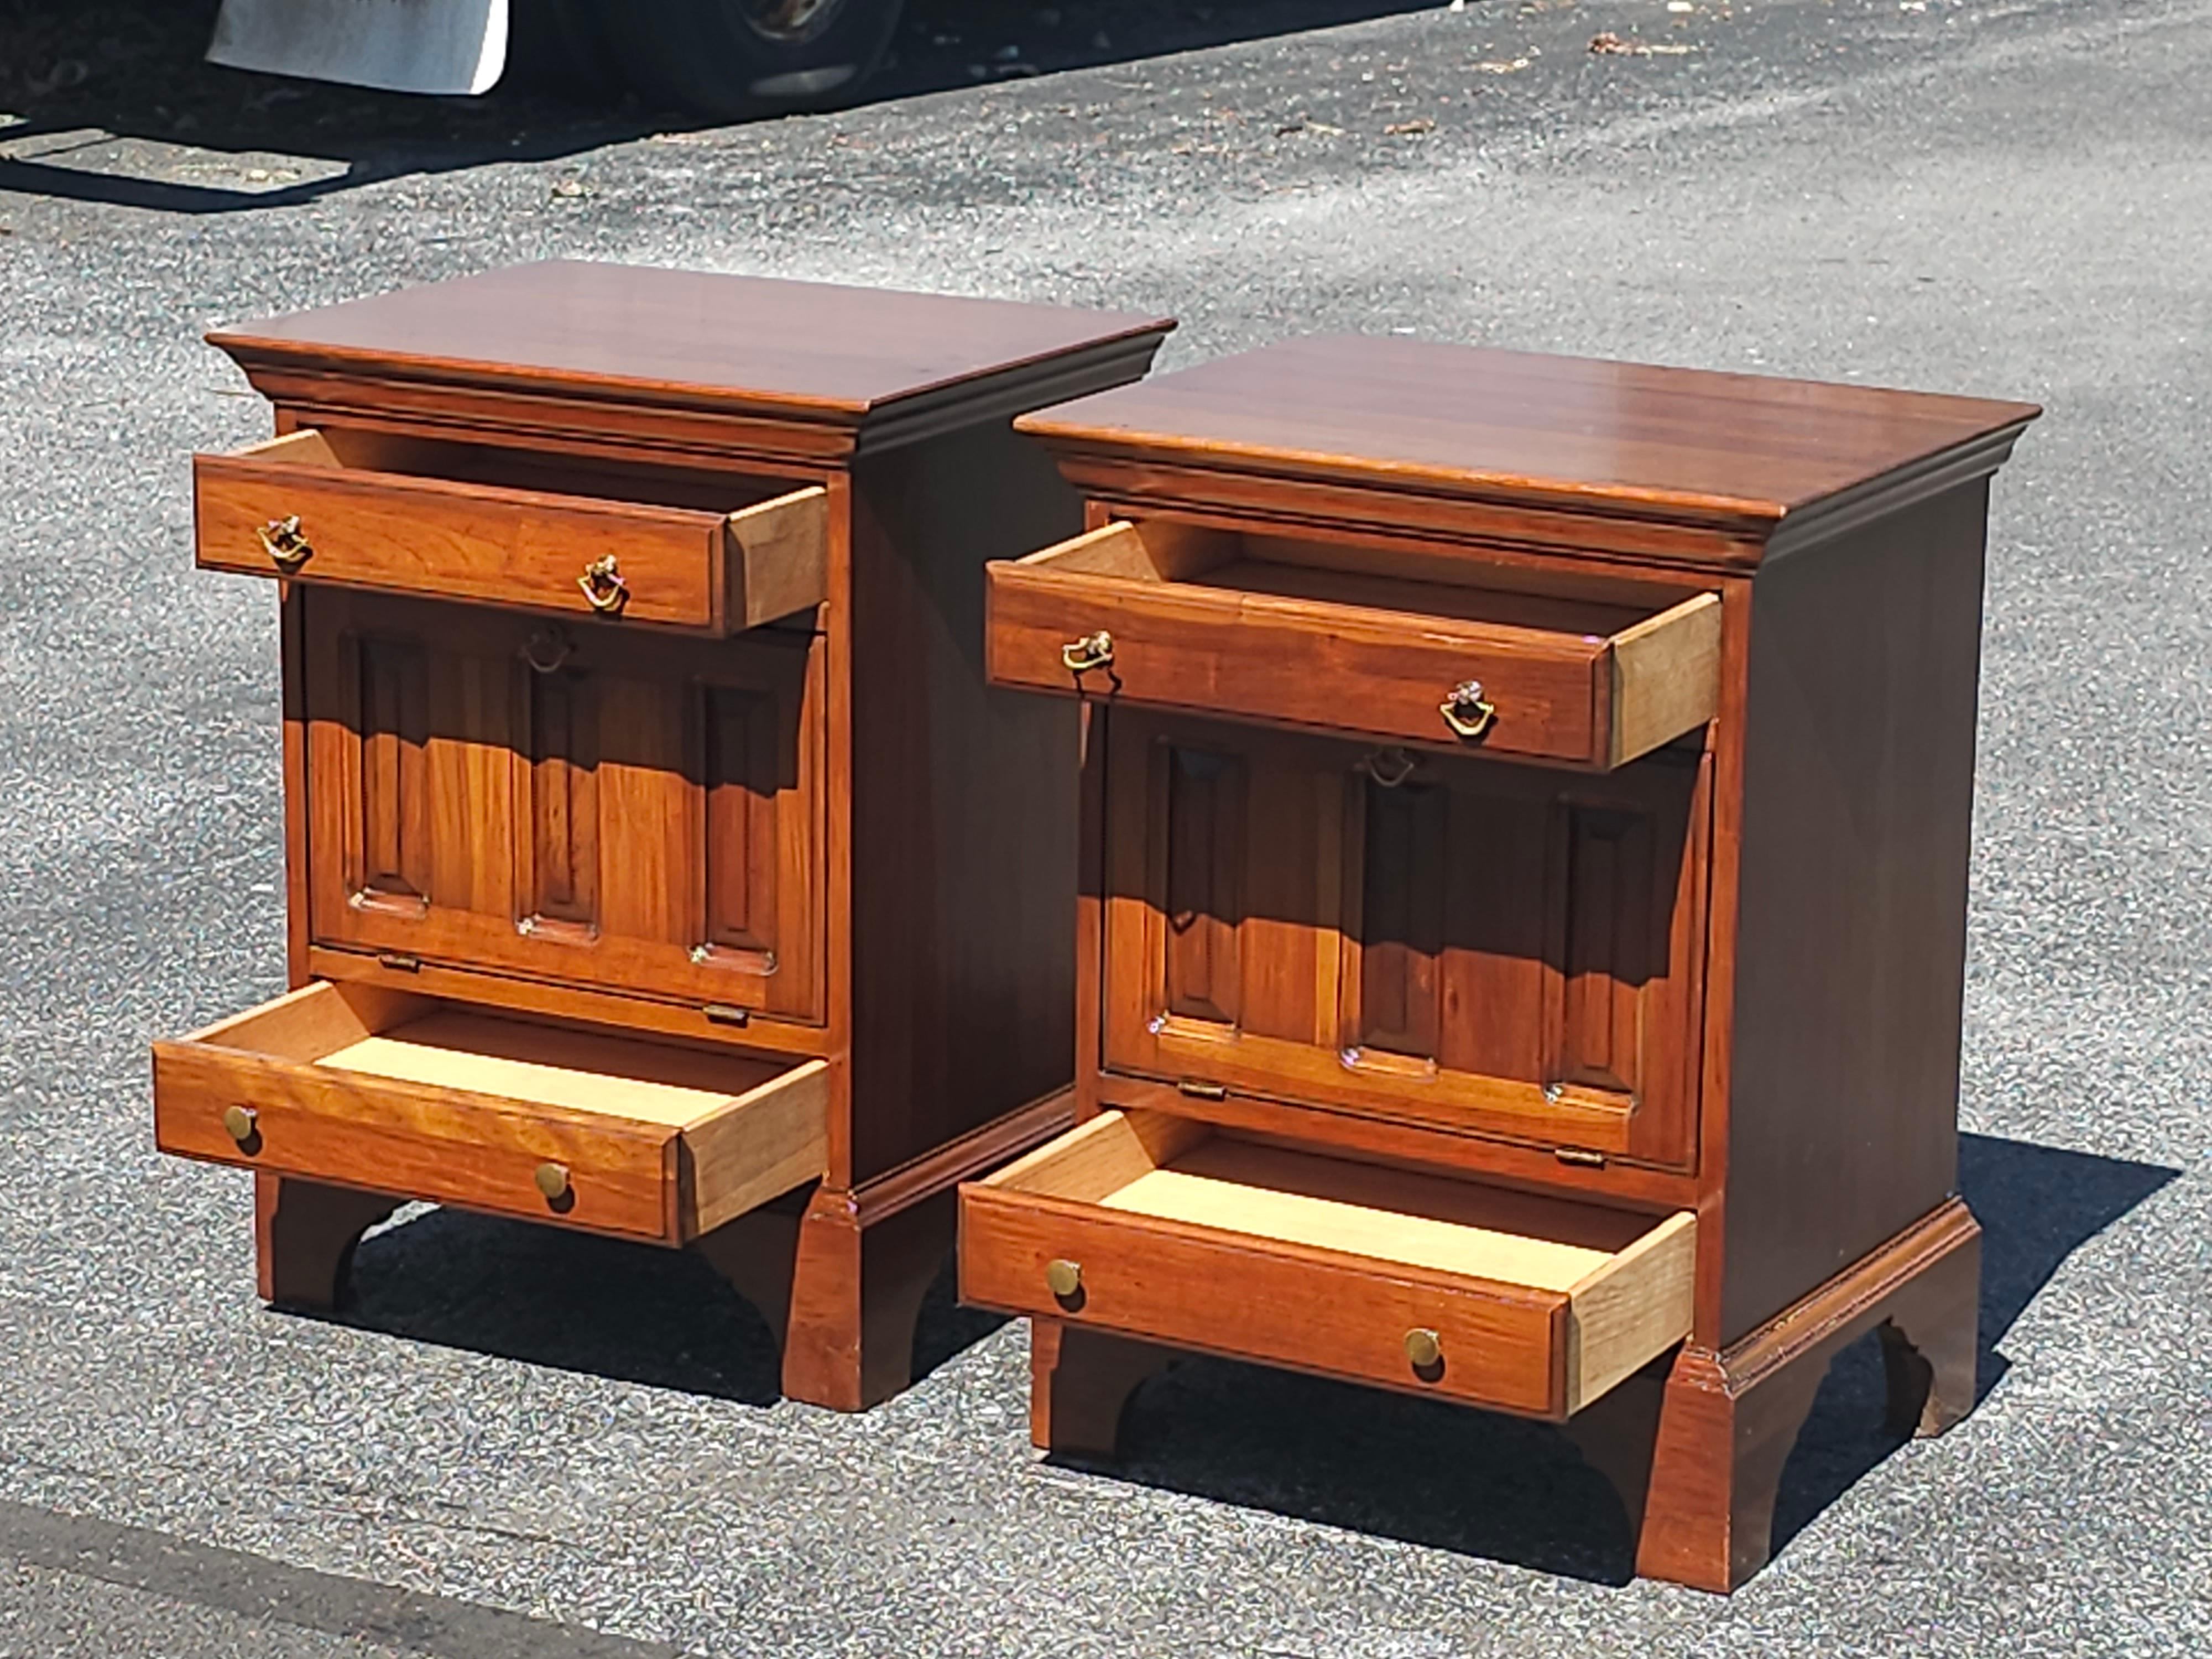 20th Century David Cabinet Cherry 2-Drawer a Abattant Door Bedside Cabinets Pair For Sale 4